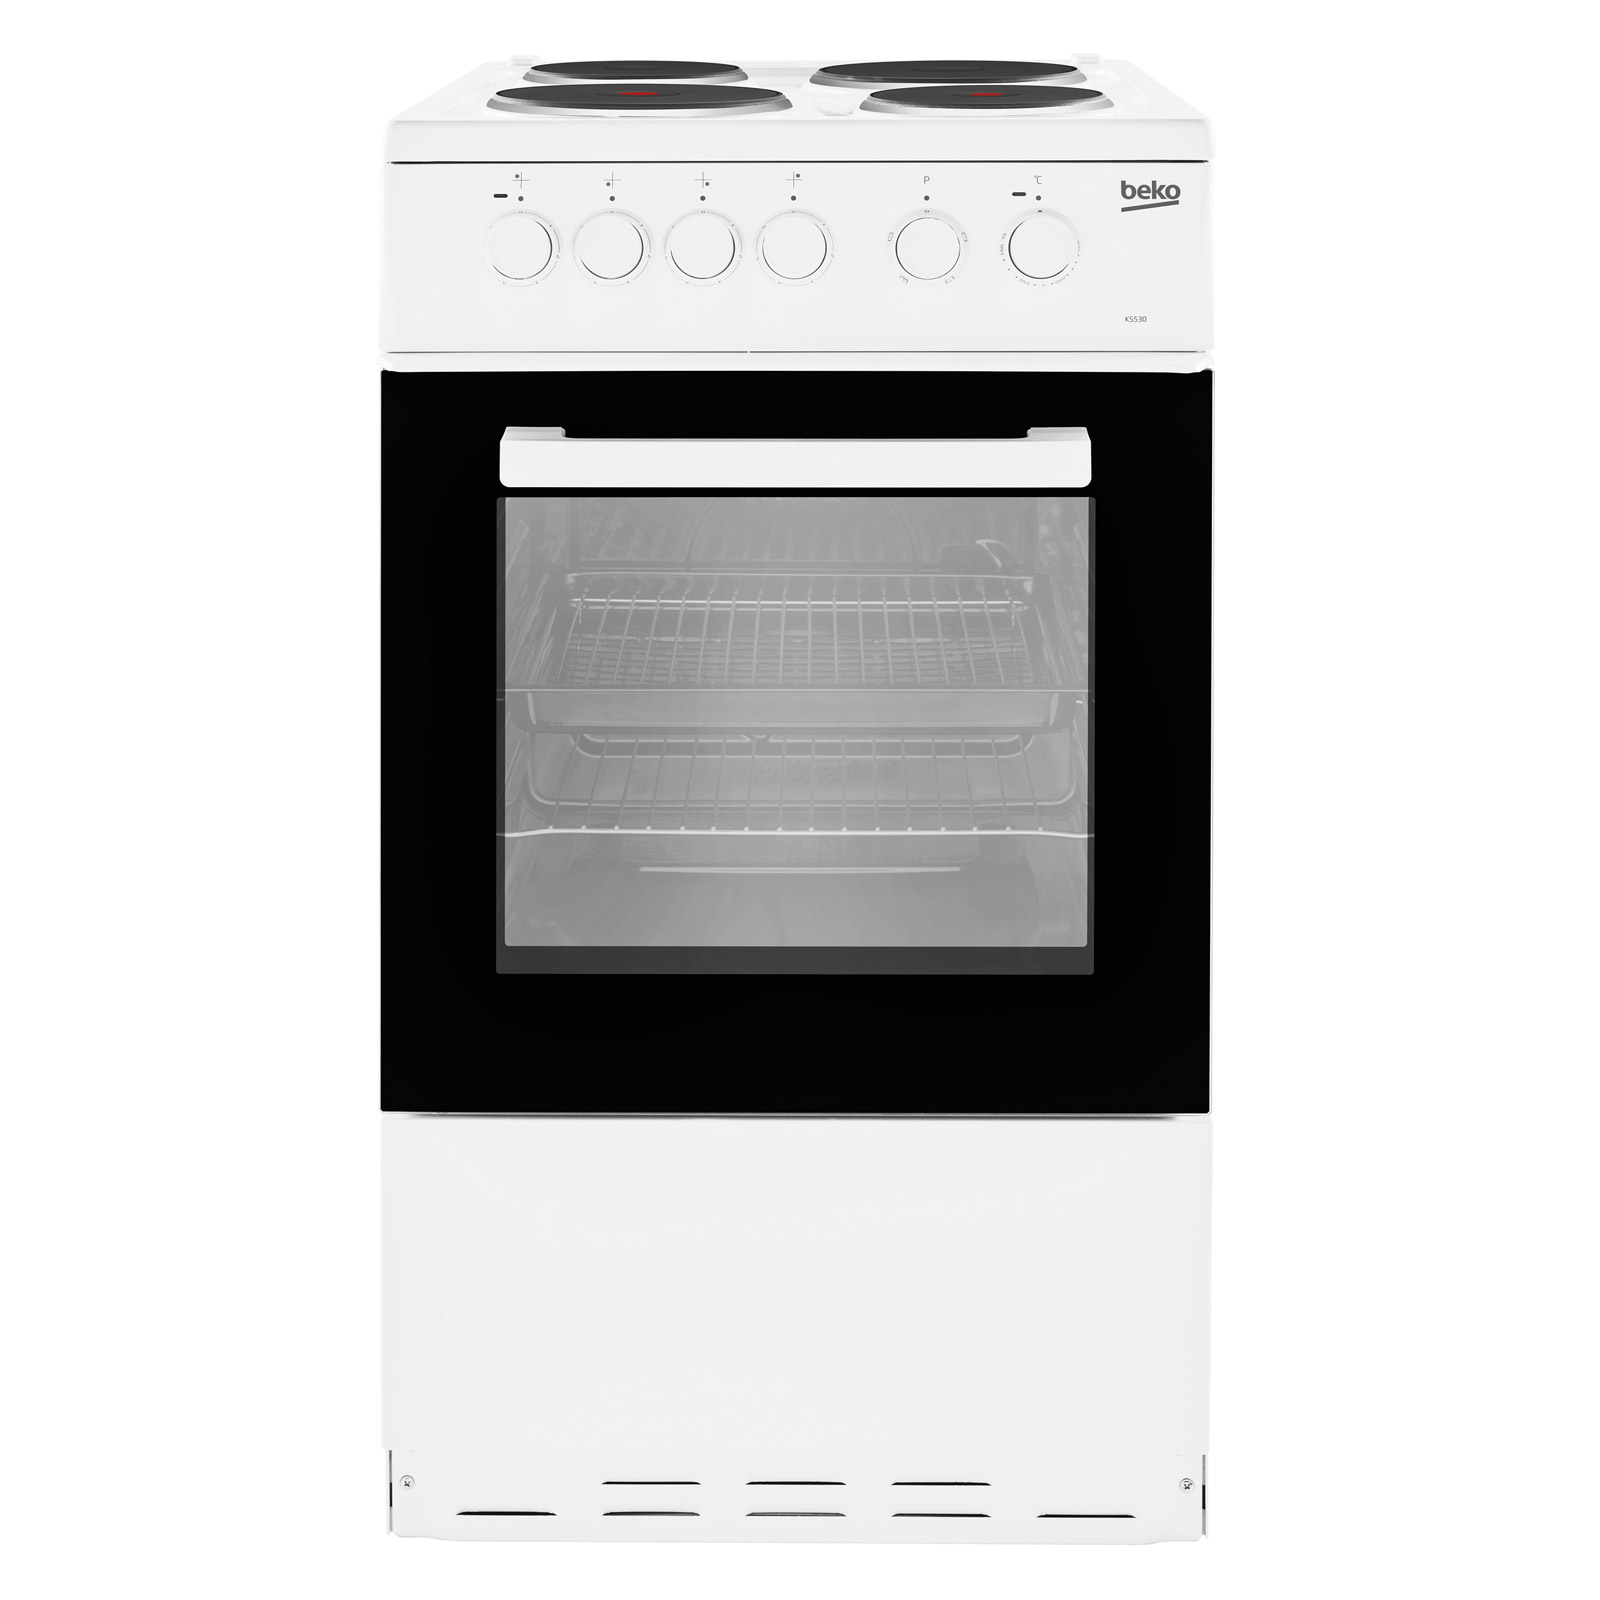 Image of Beko KS530W 50cm Single Oven Electric Cooker in White Solid Plate